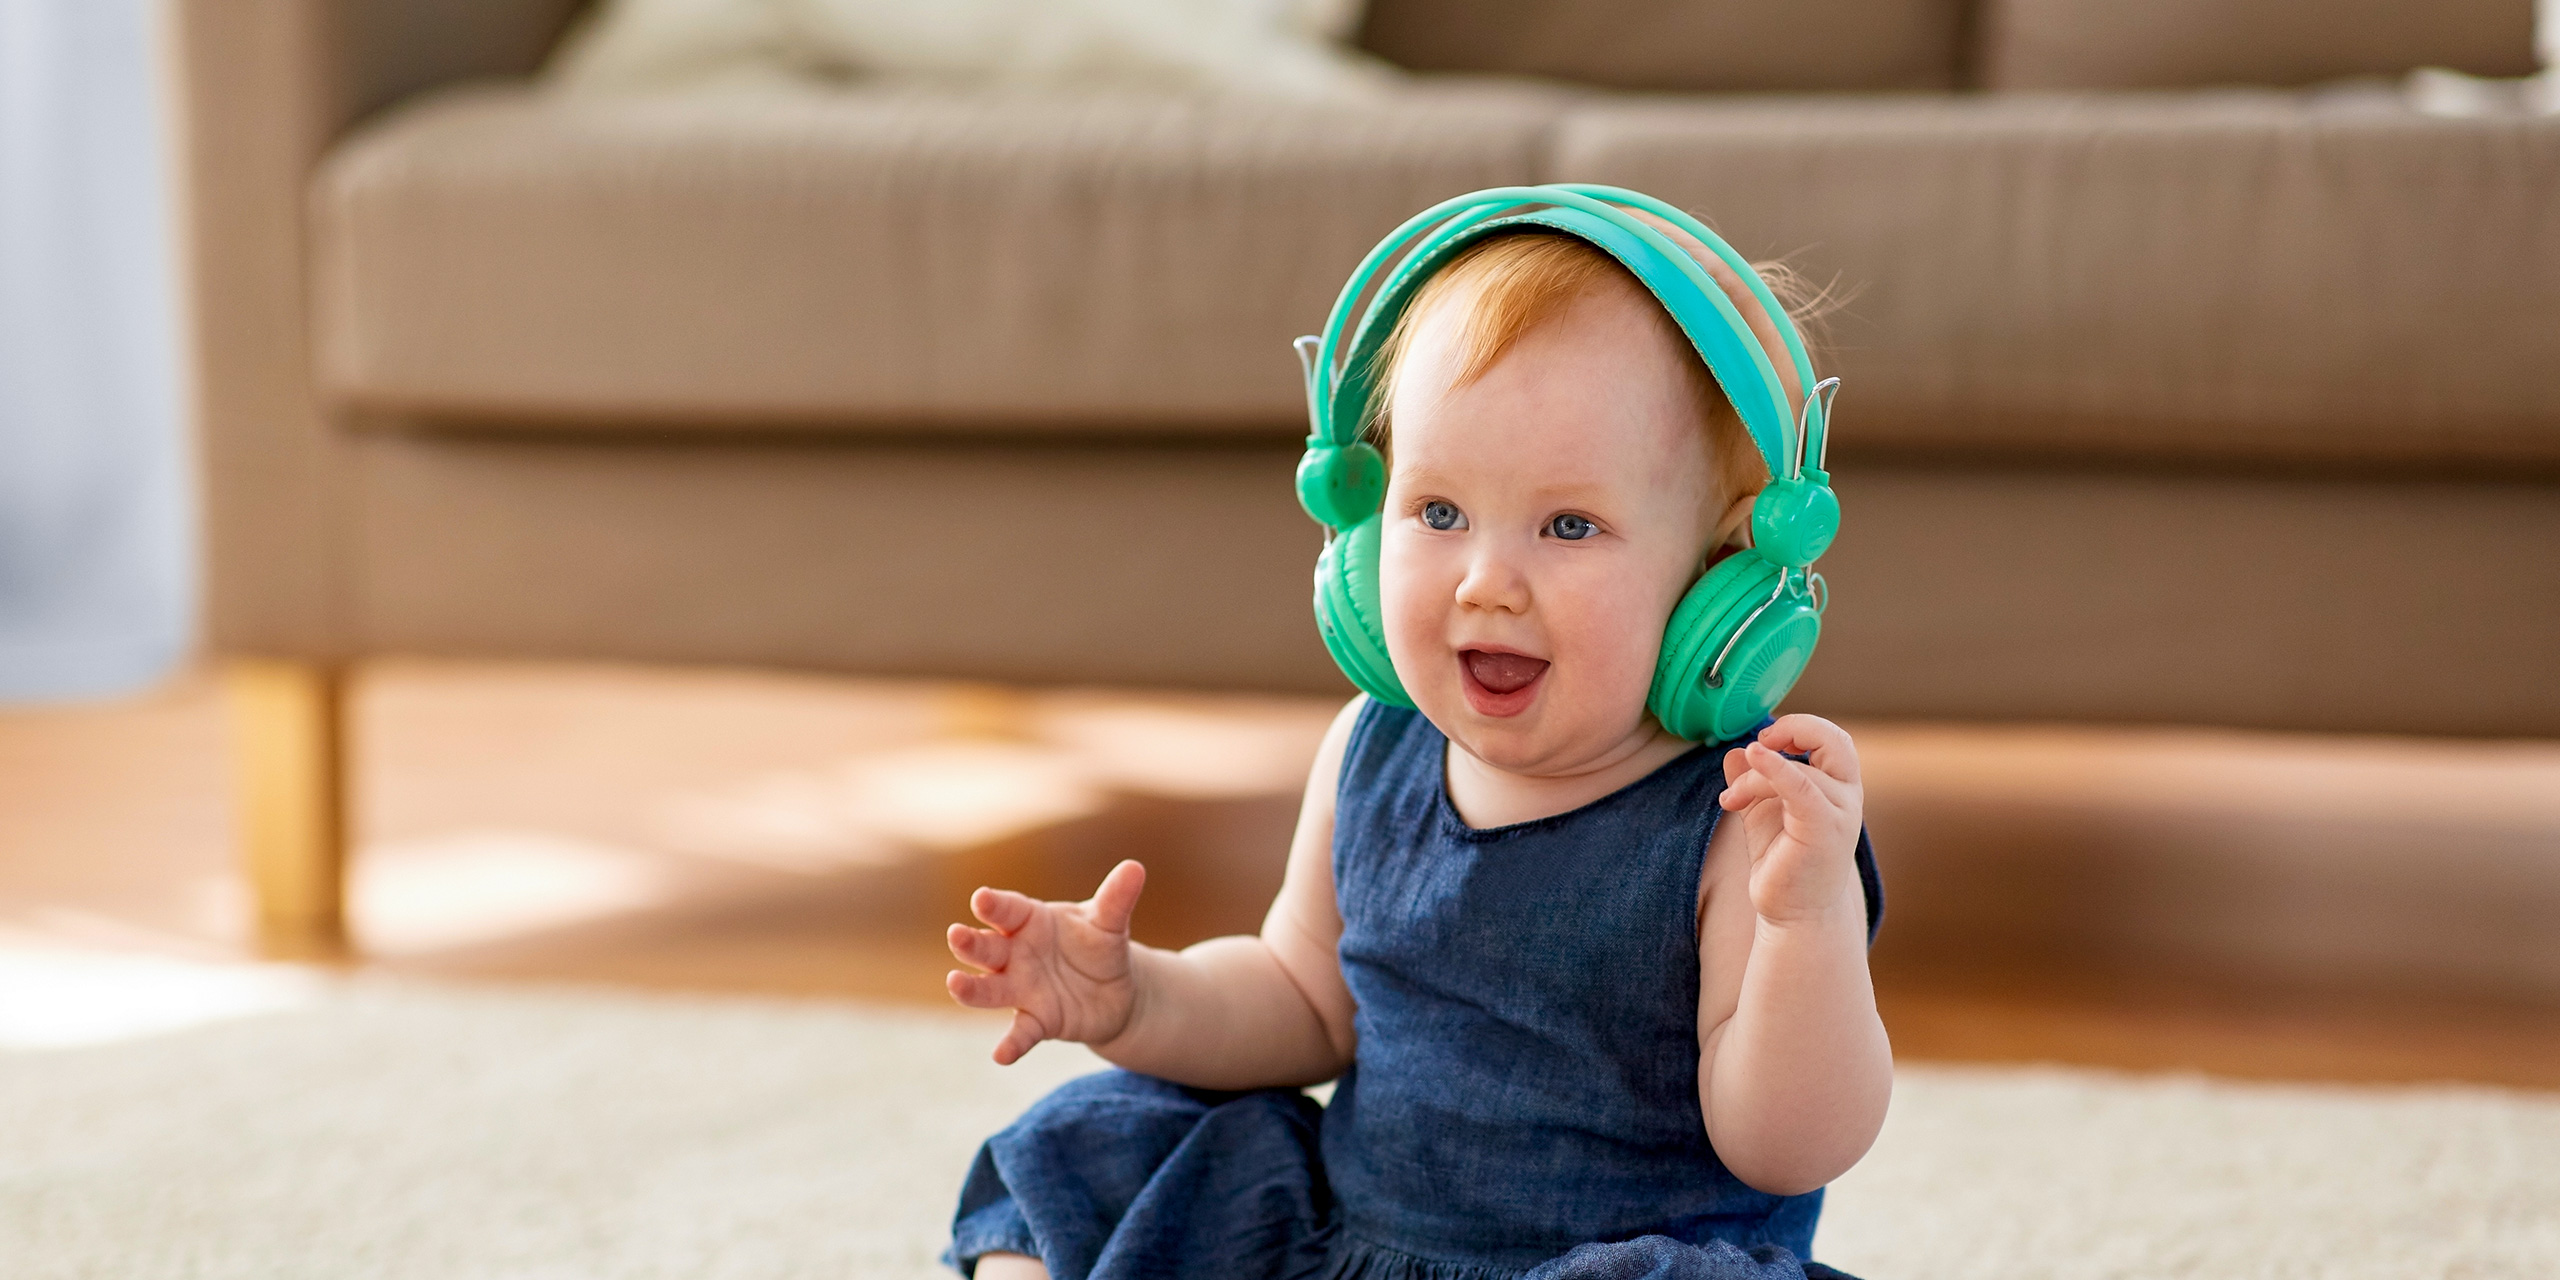 lovely redhead baby girl in headphones listening to music at home; Courtesy of Syda Productions/Shutterstock